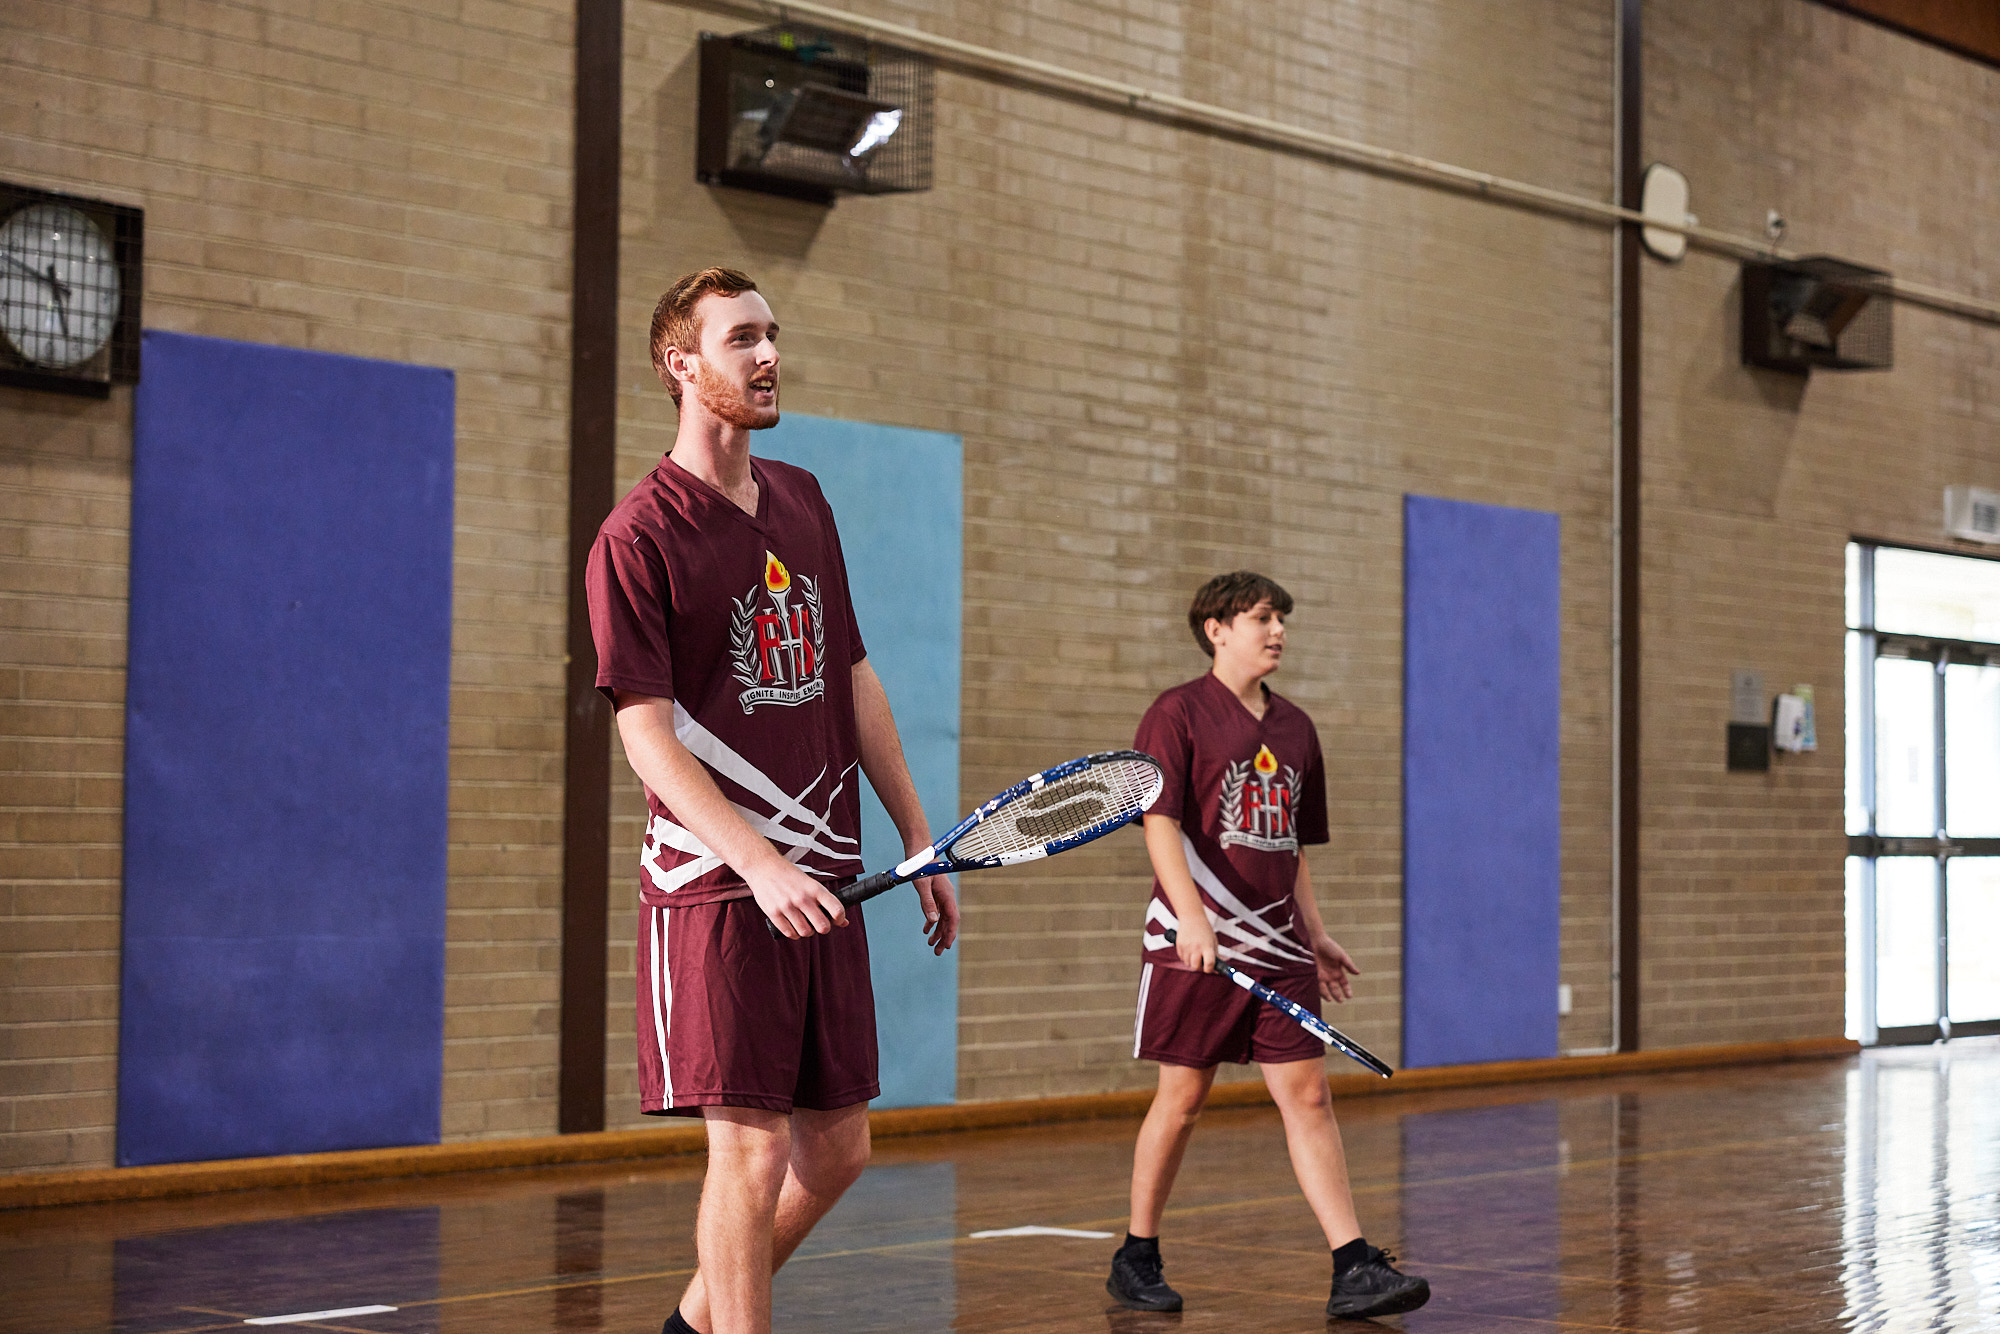 2 students playing tennis in the gym